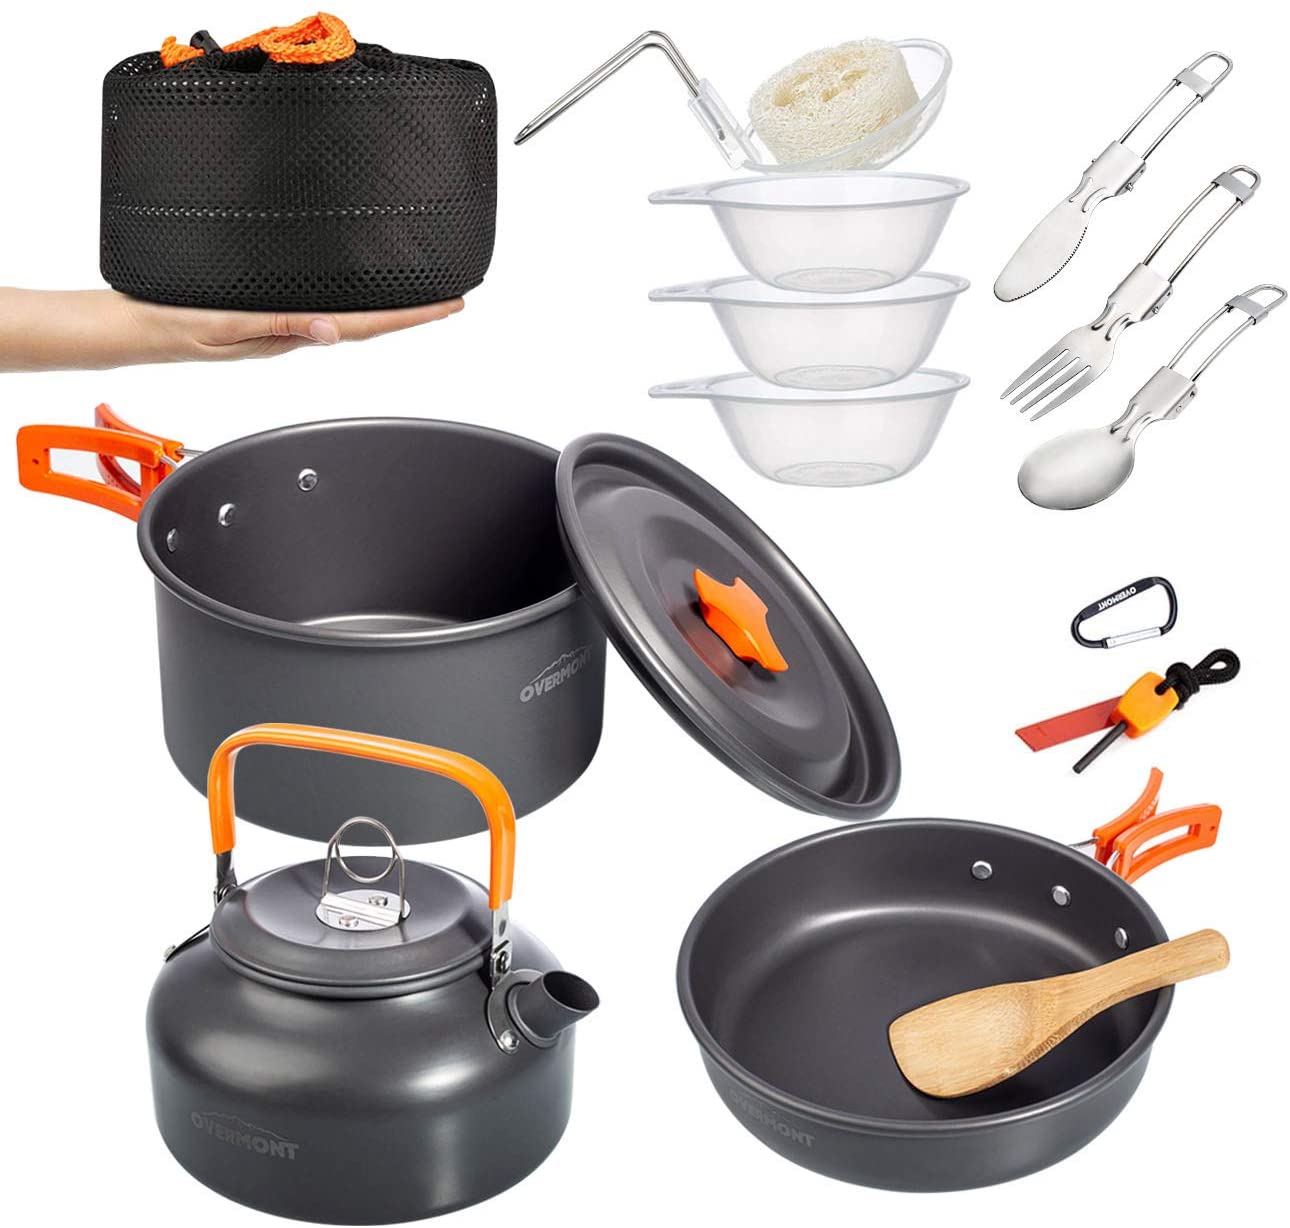 2. Overmont Camping Cookware Set